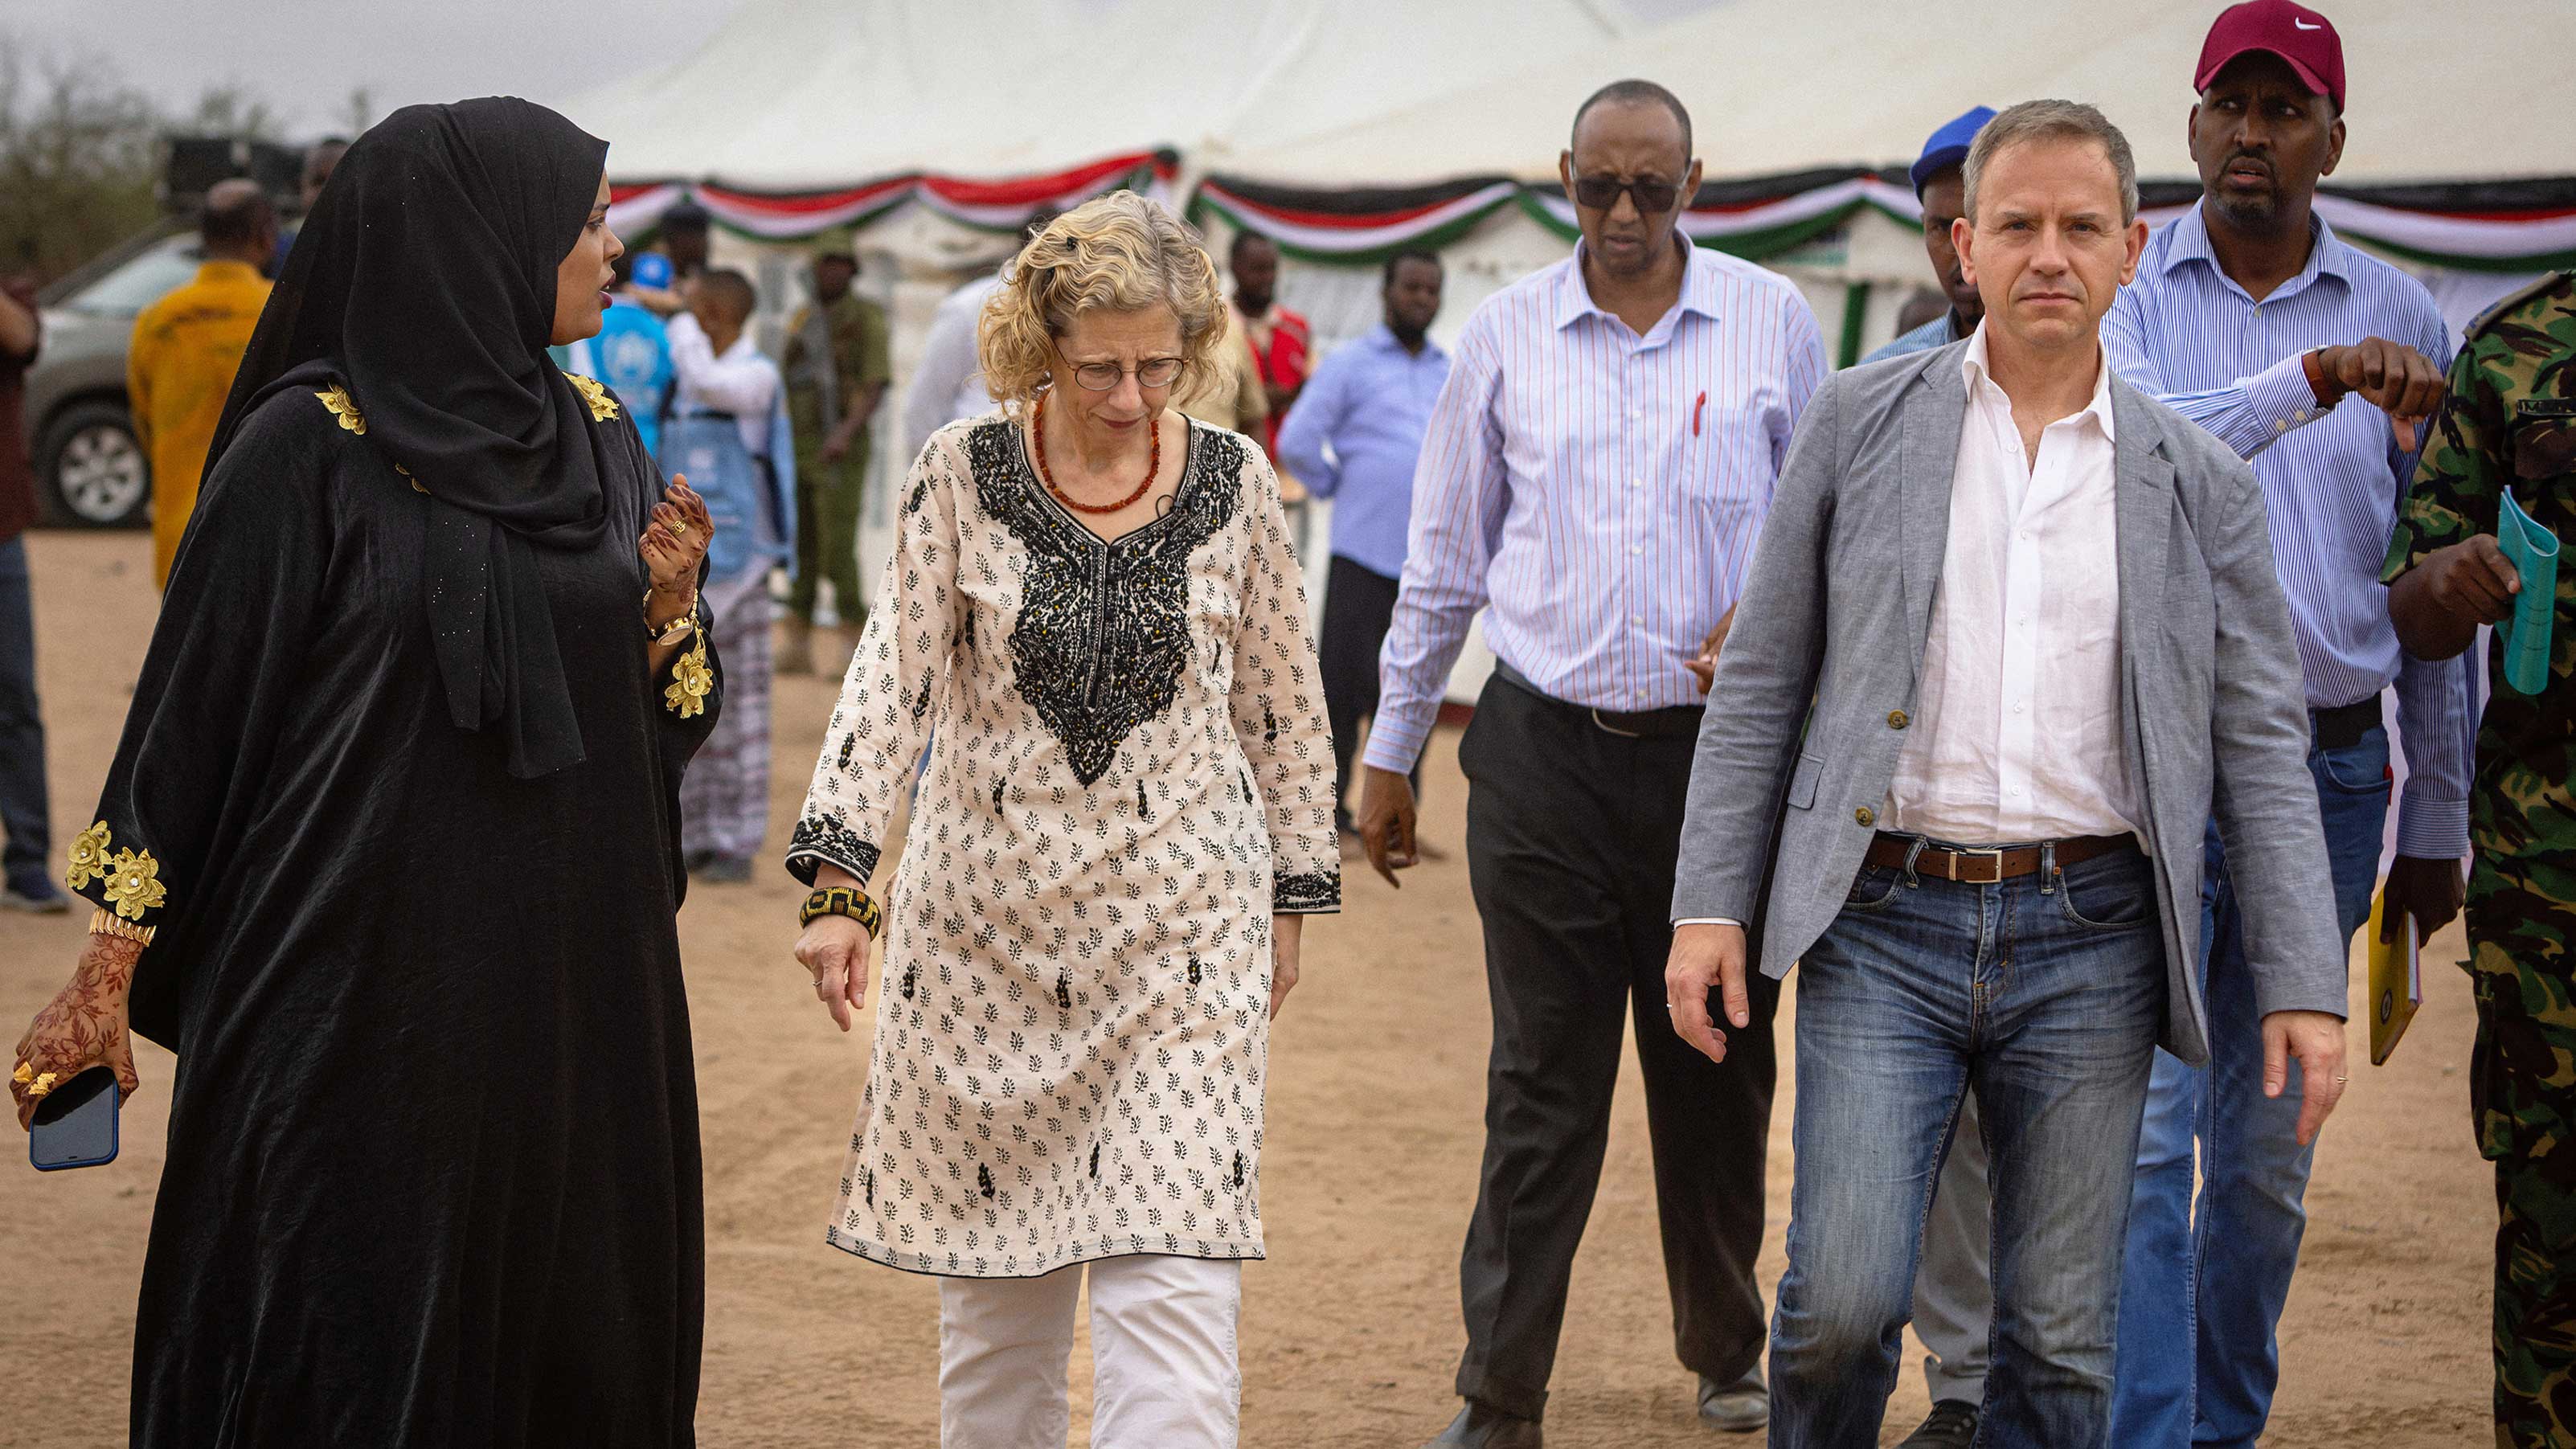 Stephen walks with UNEP Executive Director Inger Andersen and others.